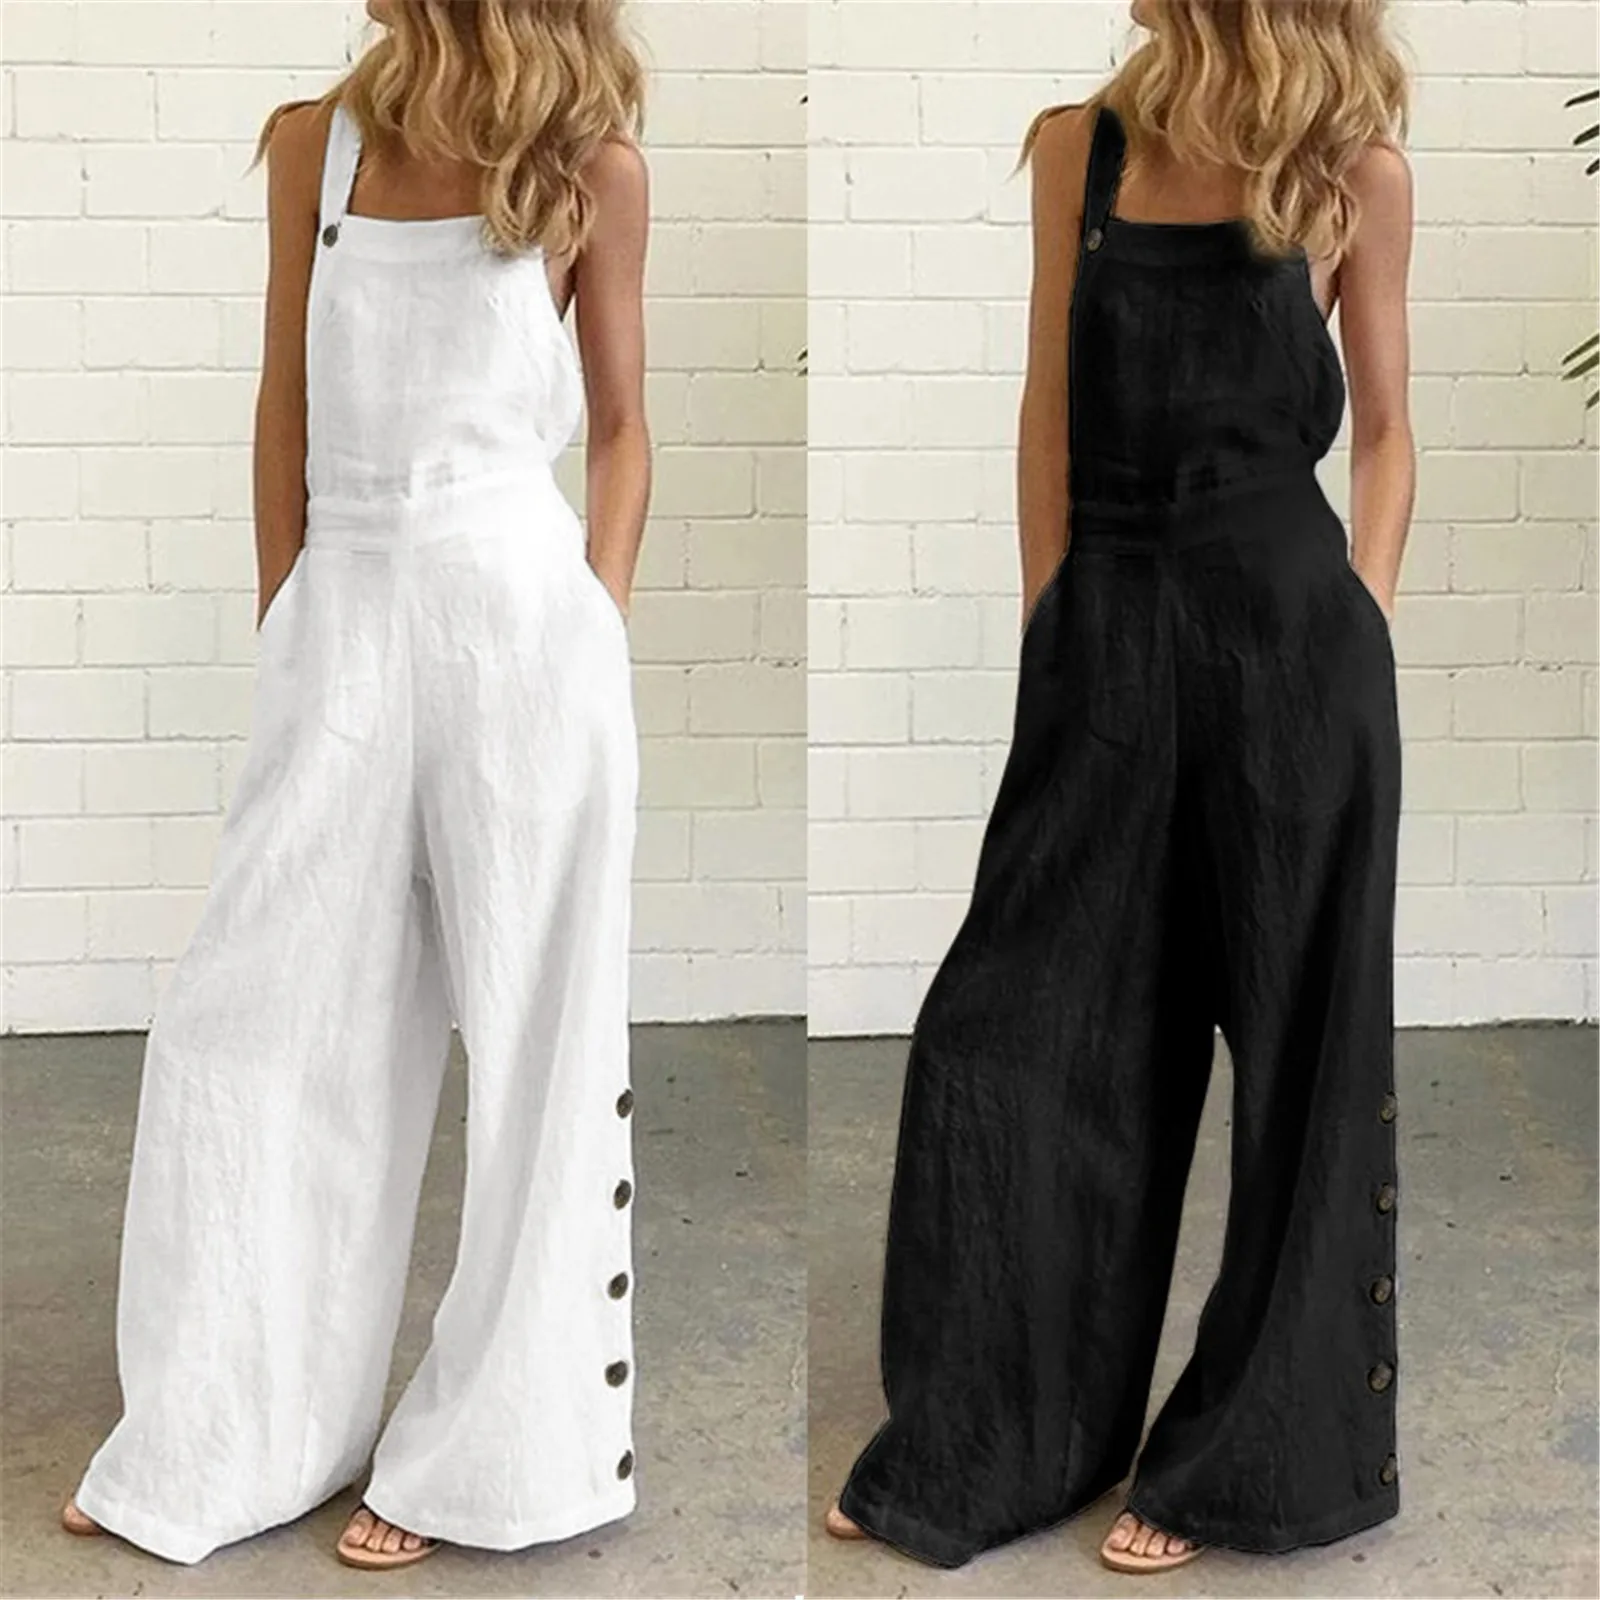 

Women Jumpsuit Summer Sleeveless Solid Color Wide Leg Pockets Loose Strappy Playsuit Overall Wide Leg Pockets mujer Playsuit